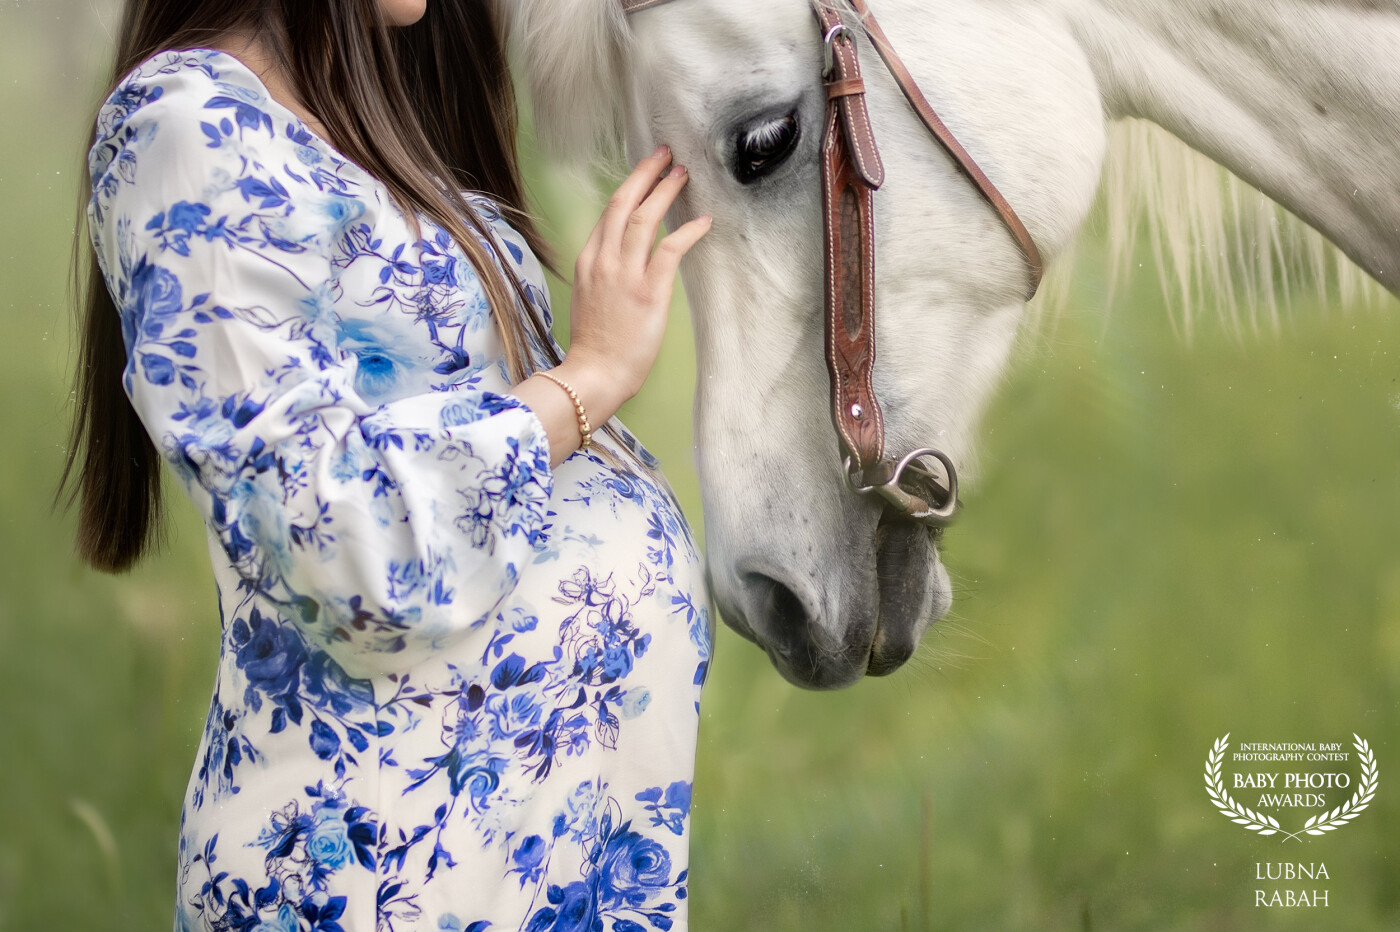 Ah, the magic of pregnancy! It truly is a remarkable and incredible journey. Bringing new life into the world is nothing short of extraordinary. From the moment of conception to the day of birth, there's just something awe-inspiring about the whole process.